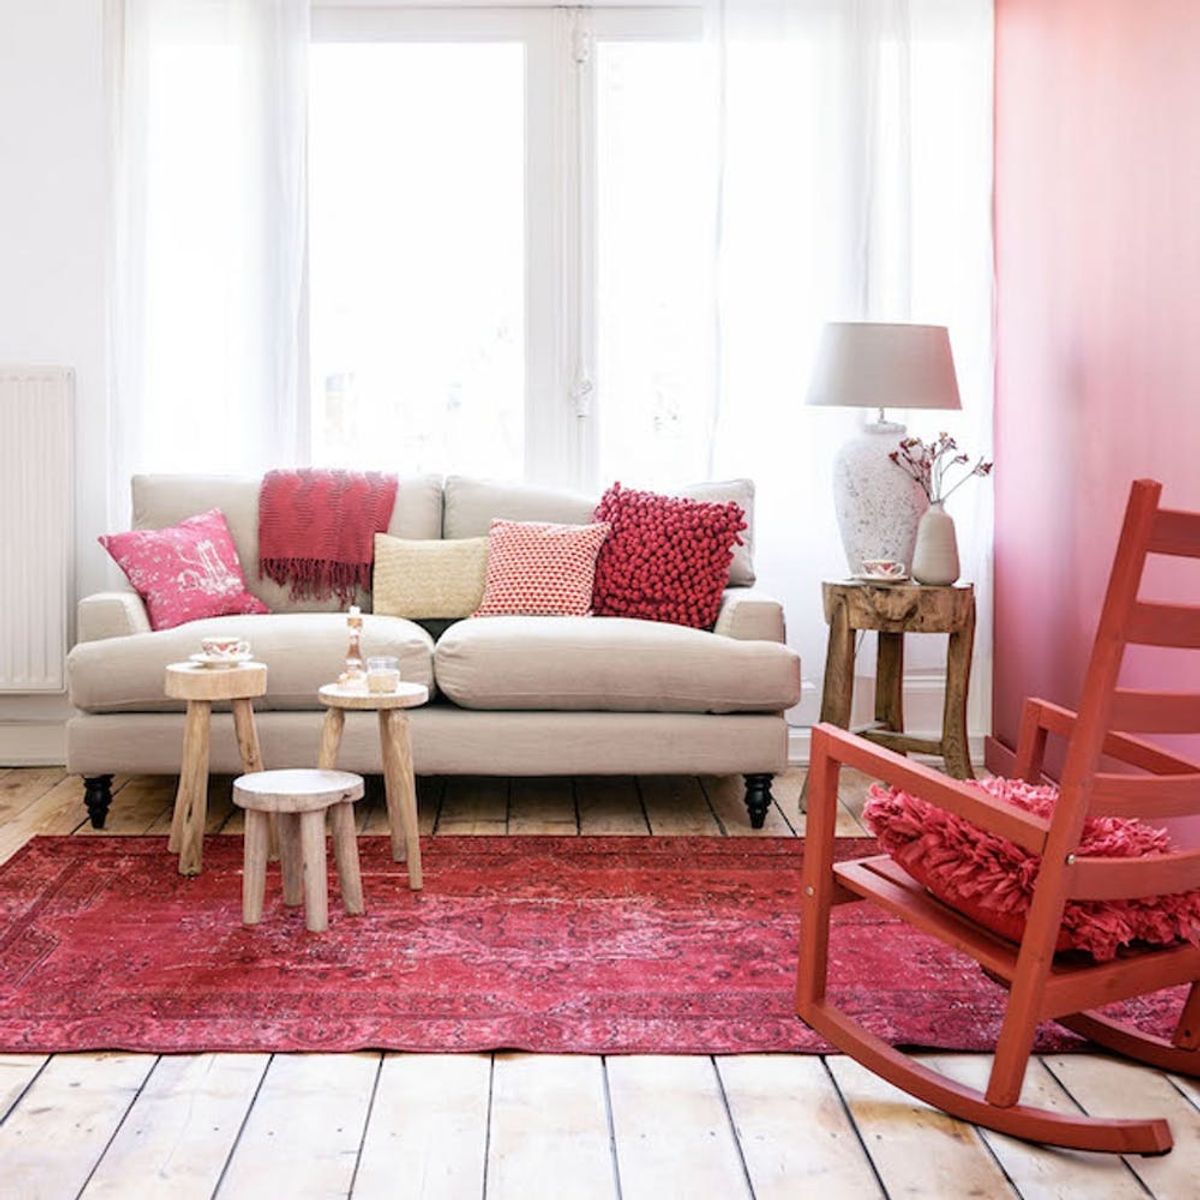 How to Work the Pantone Palette “Florabundant” into Your Home